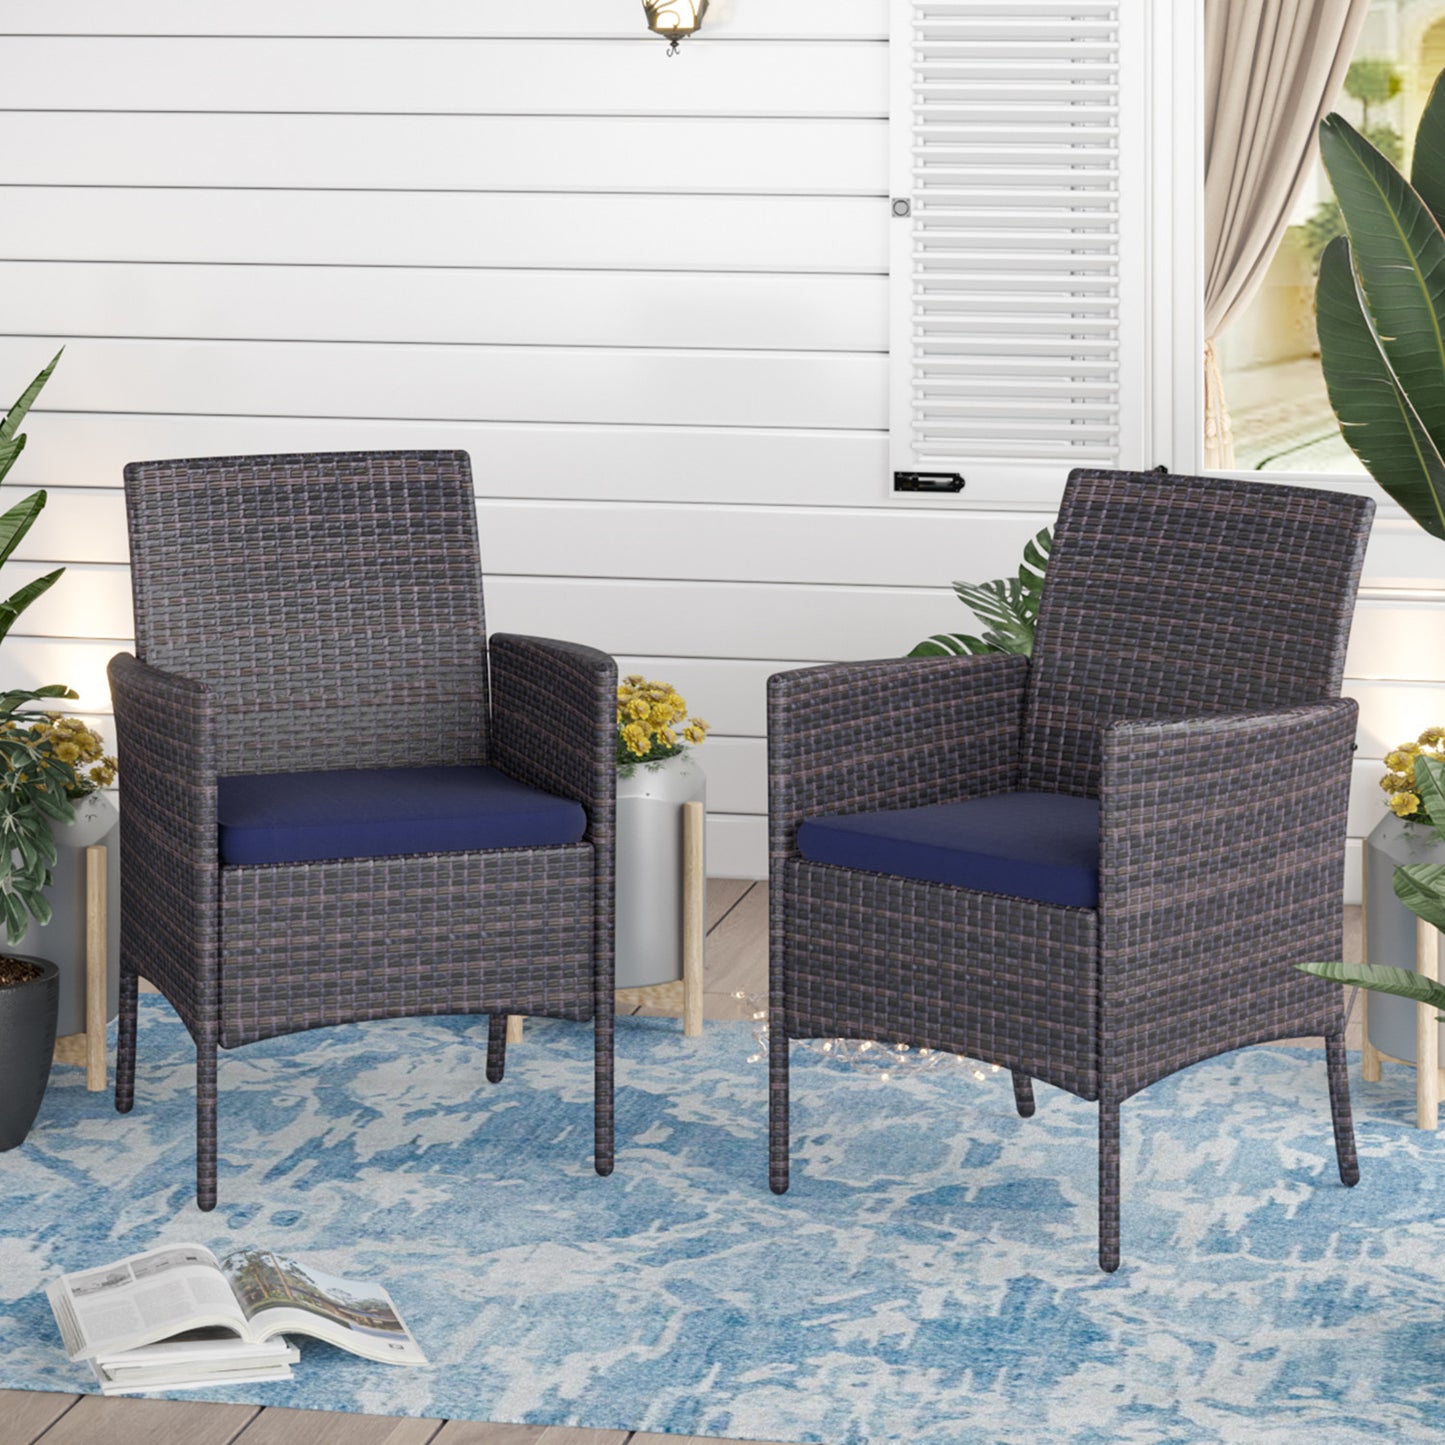 Sophia & William Patio Rattan Dining Chairs Set of 2 with Blue Cushions, Dark Brown